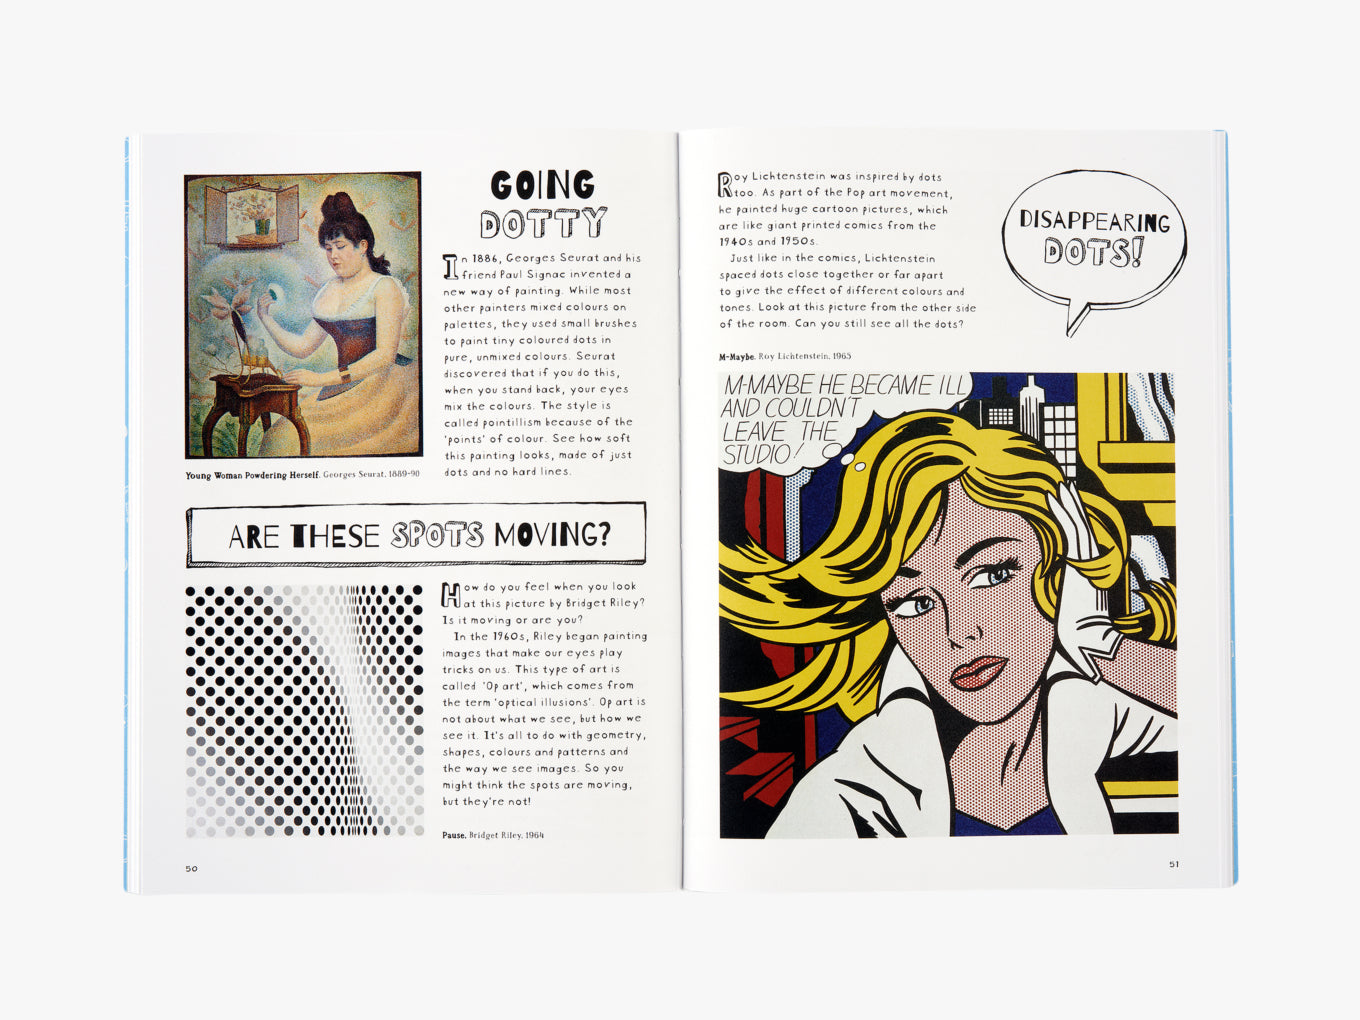 A two page spread from inside that book called ‘Going Dotty’ explaining art styles such as pointillism, comic art, and optical illusions with examples pieces.